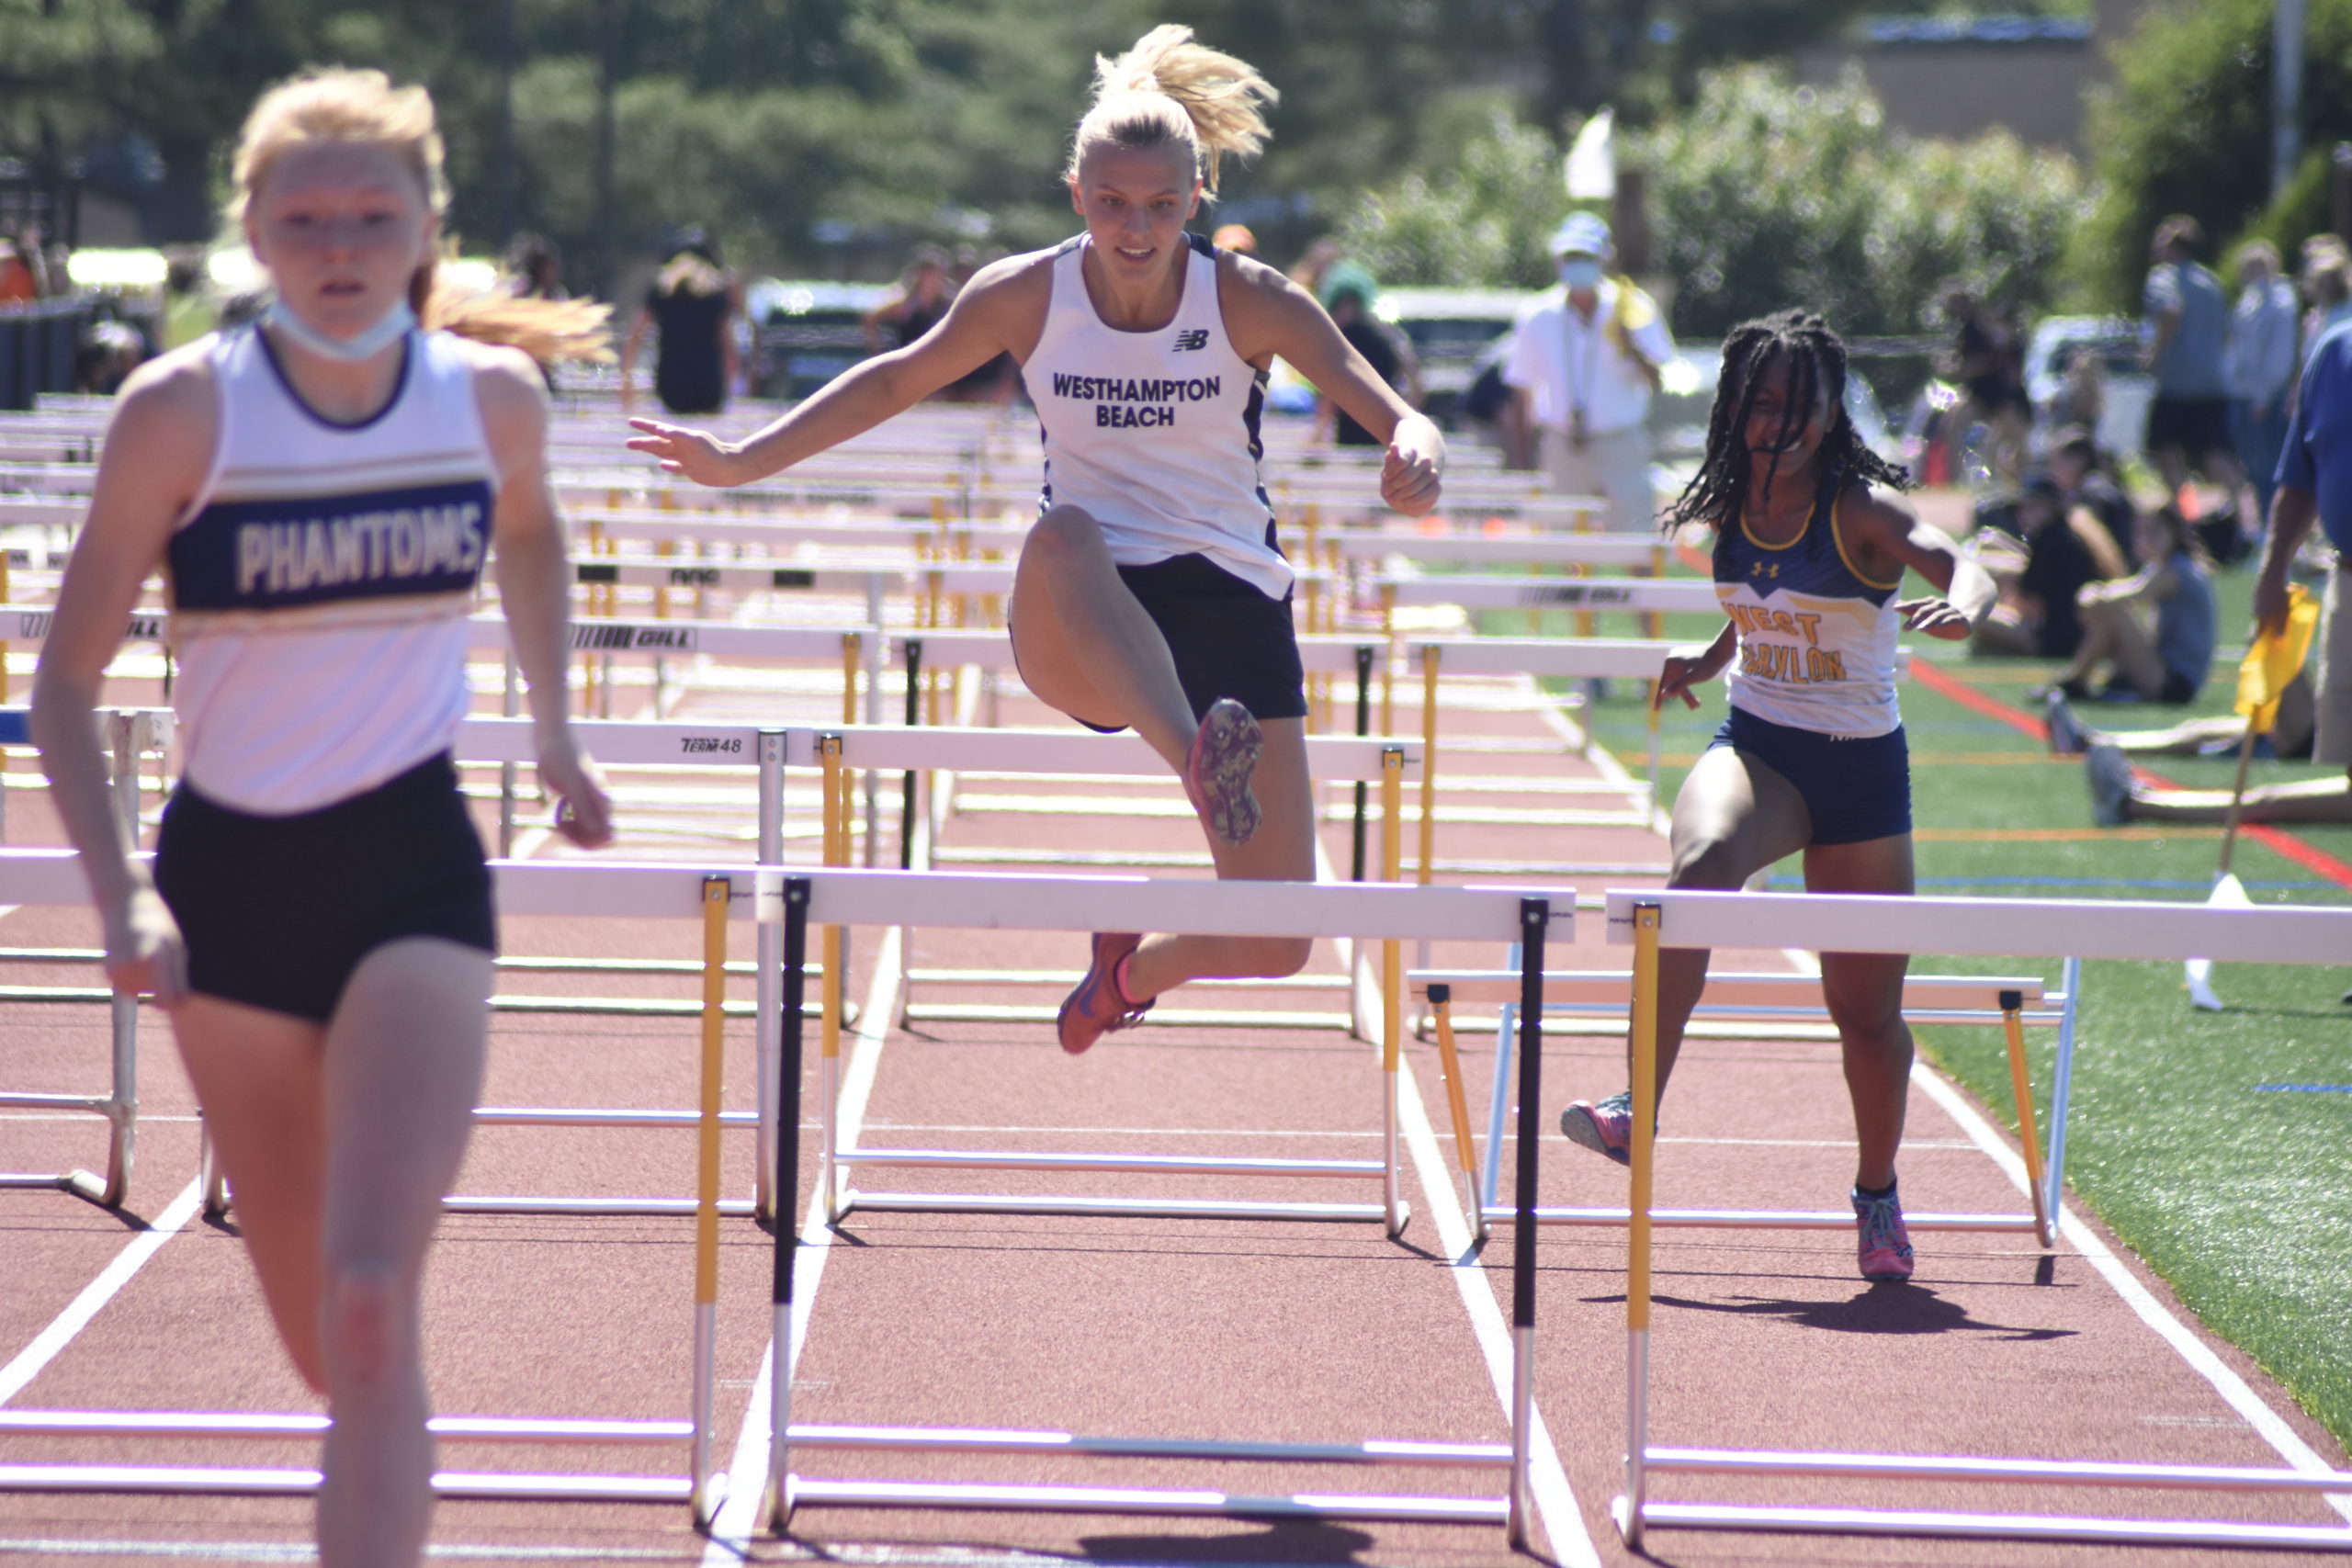 Westhampton Beach junior Valerie Finke finished seventh in the 100-meter hurdles at counties.